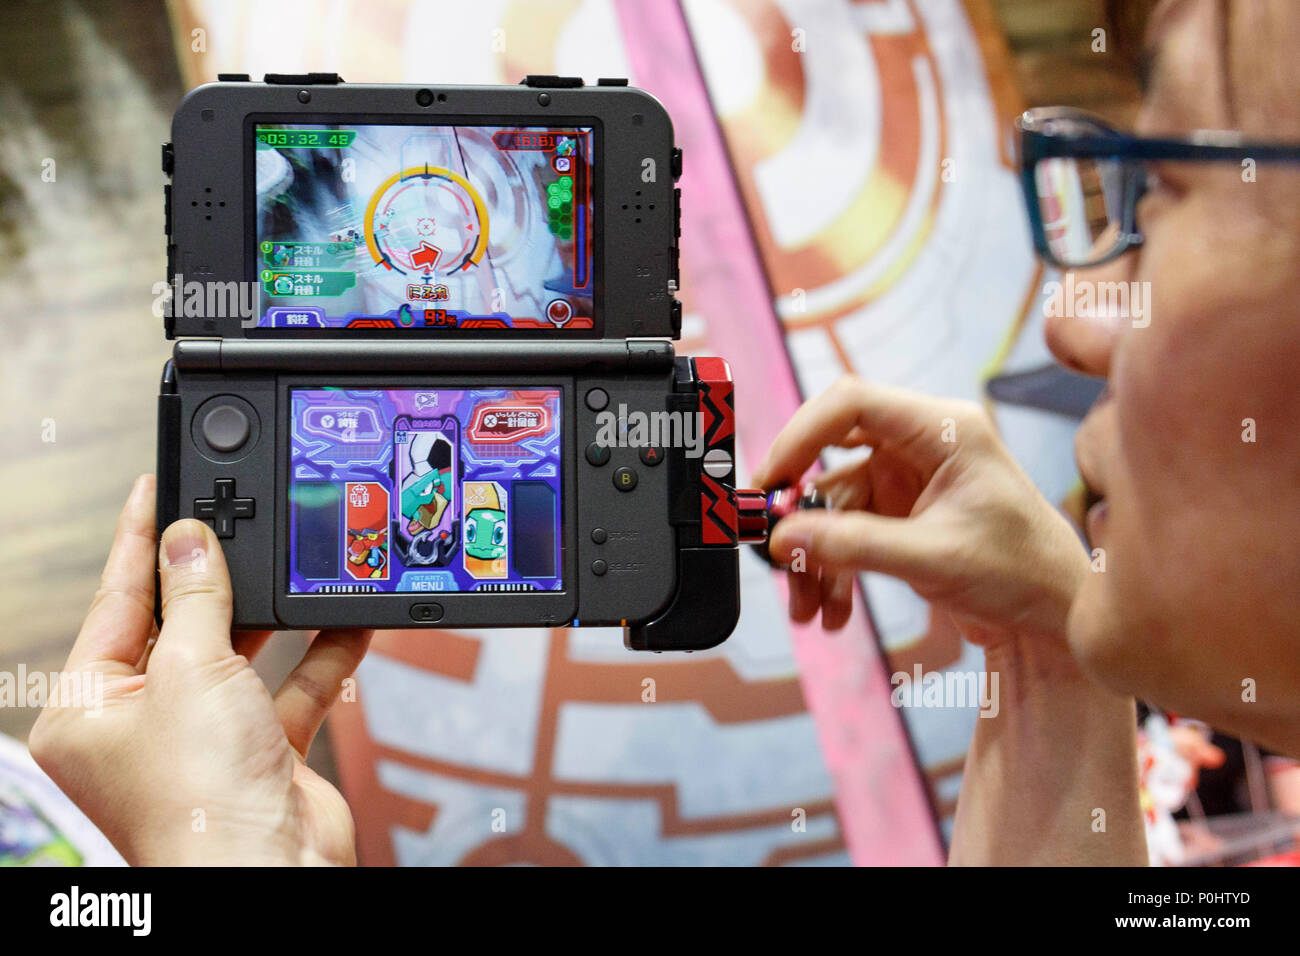 Nintendo 3ds High Resolution Stock Photography and Images - Alamy